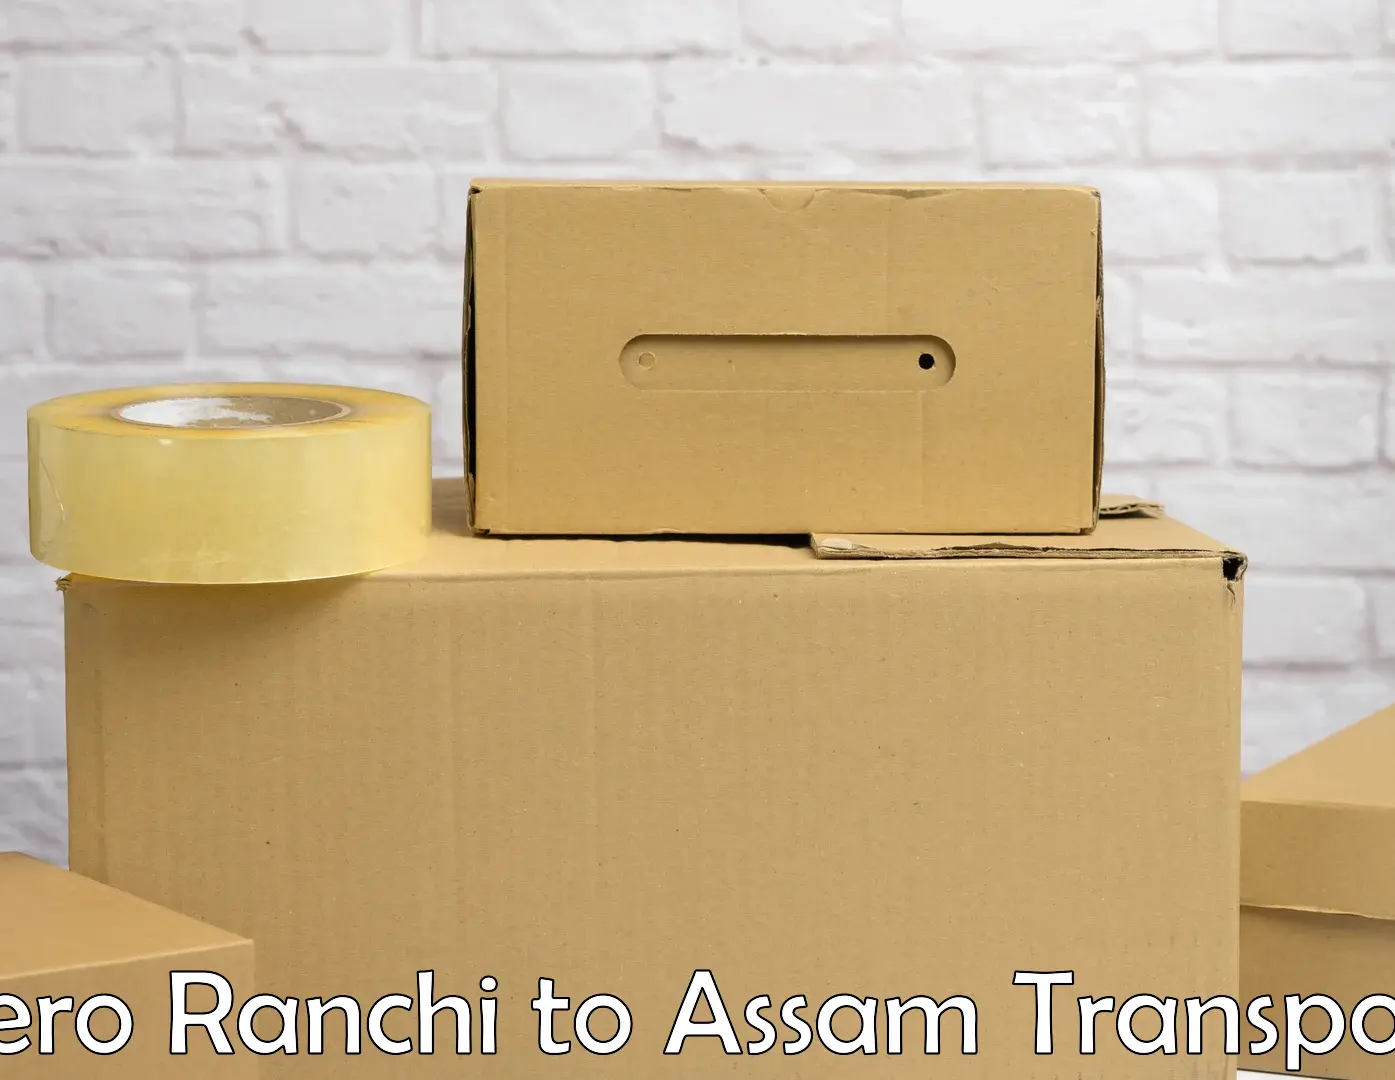 Part load transport service in India Bero Ranchi to Lala Assam